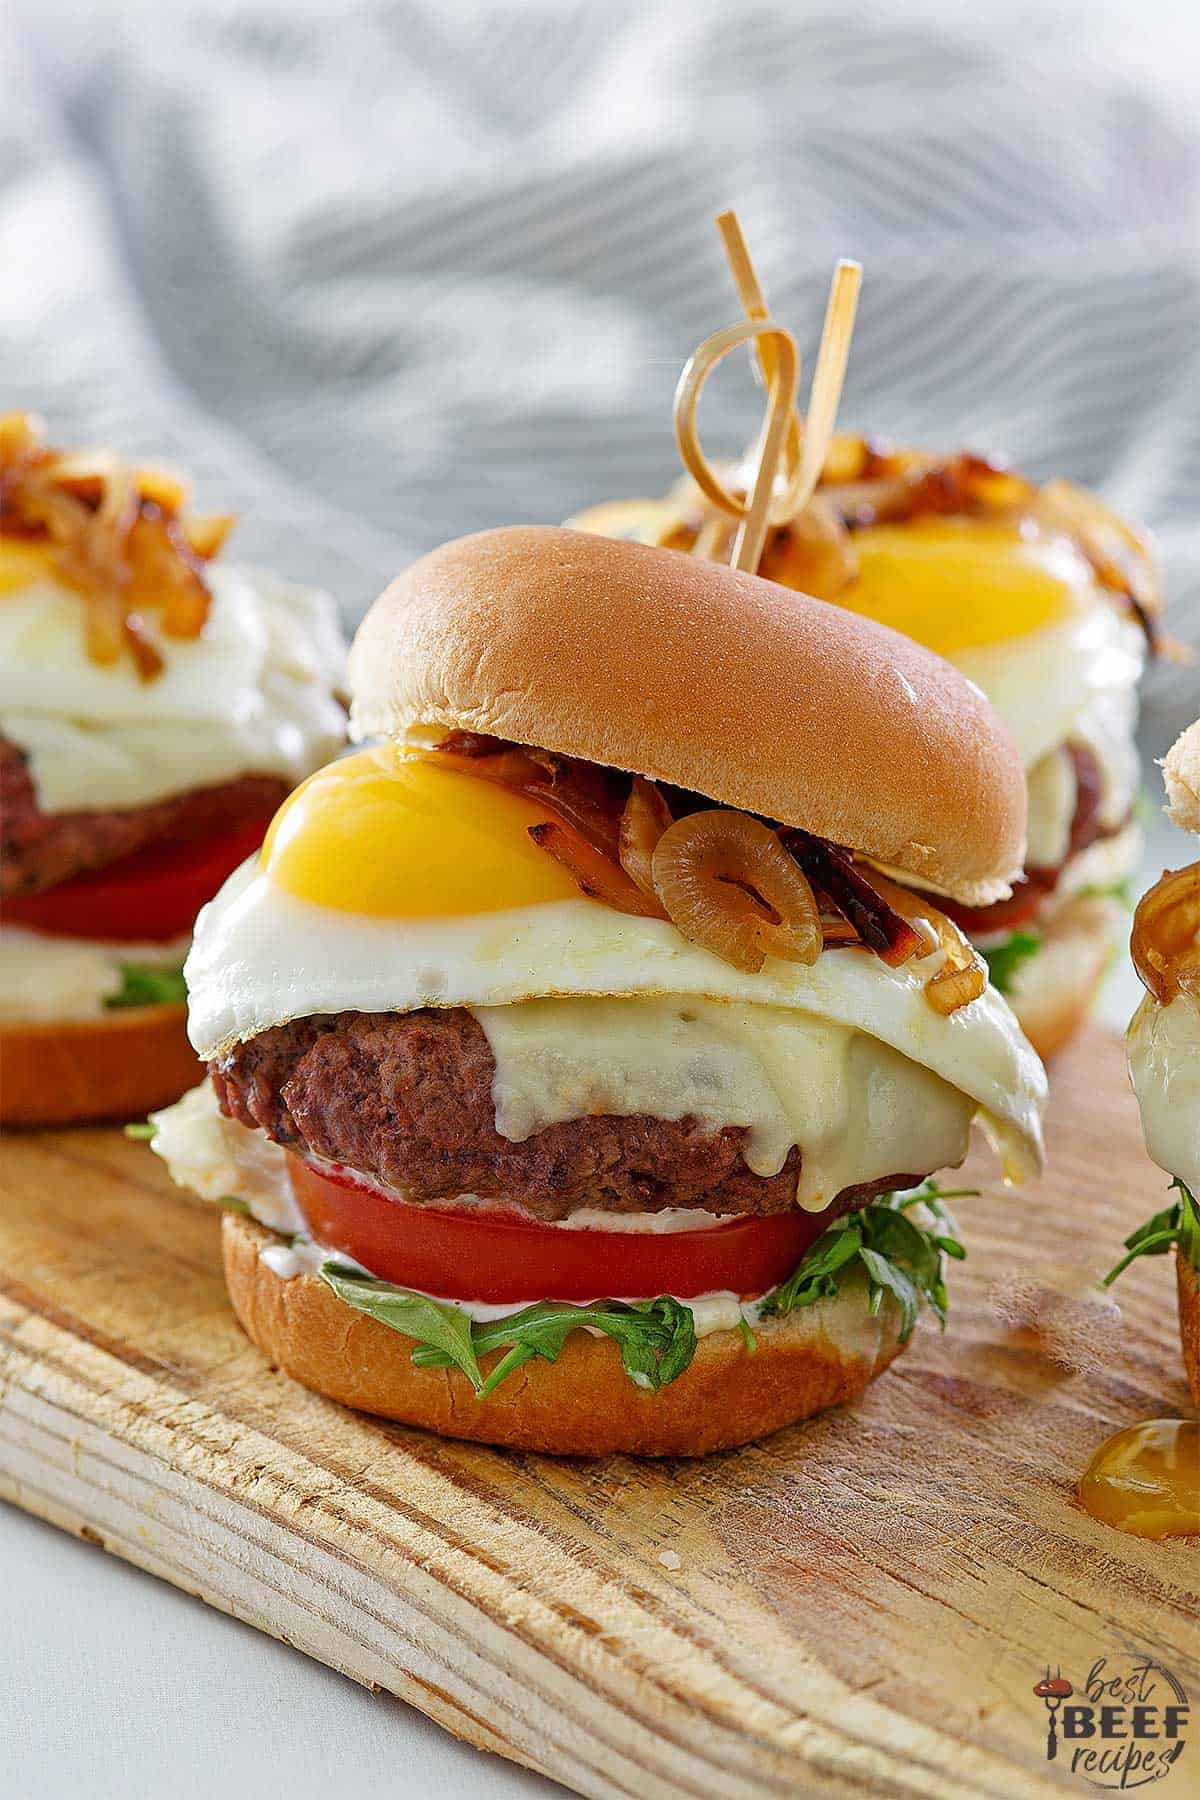 Three egg burgers on a wood surface